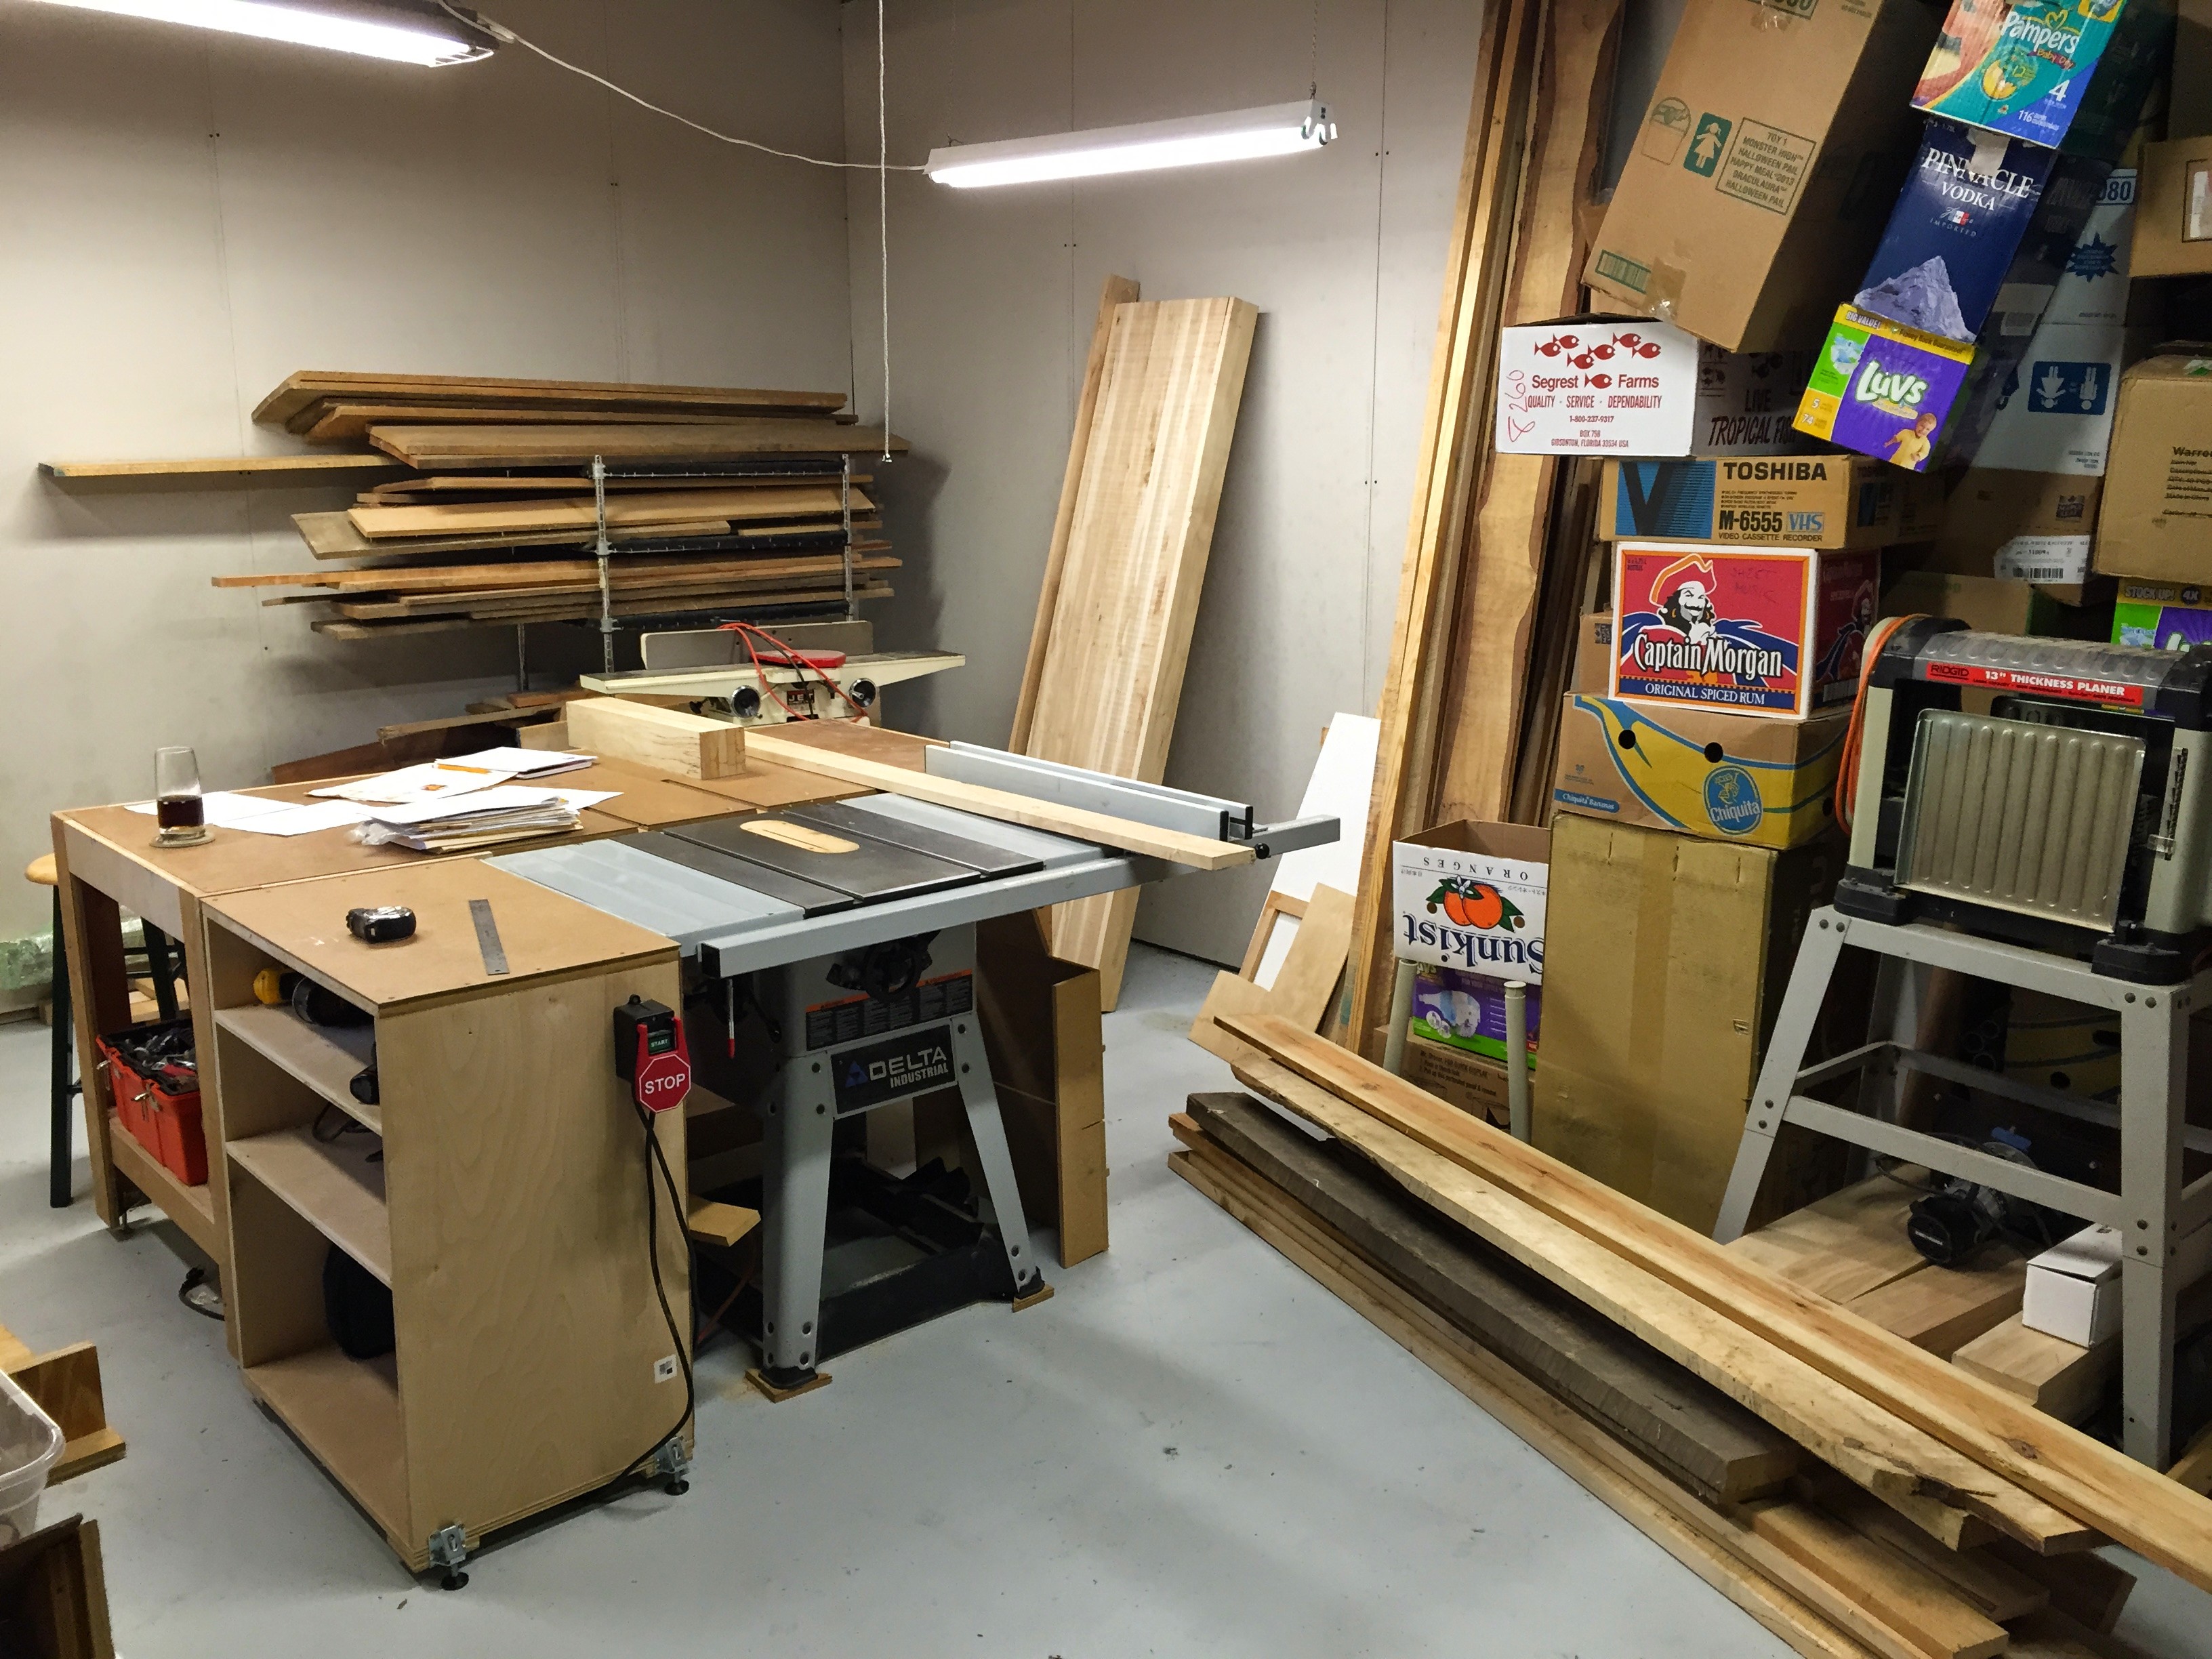 Table saw and tons of stored boxes for the next move